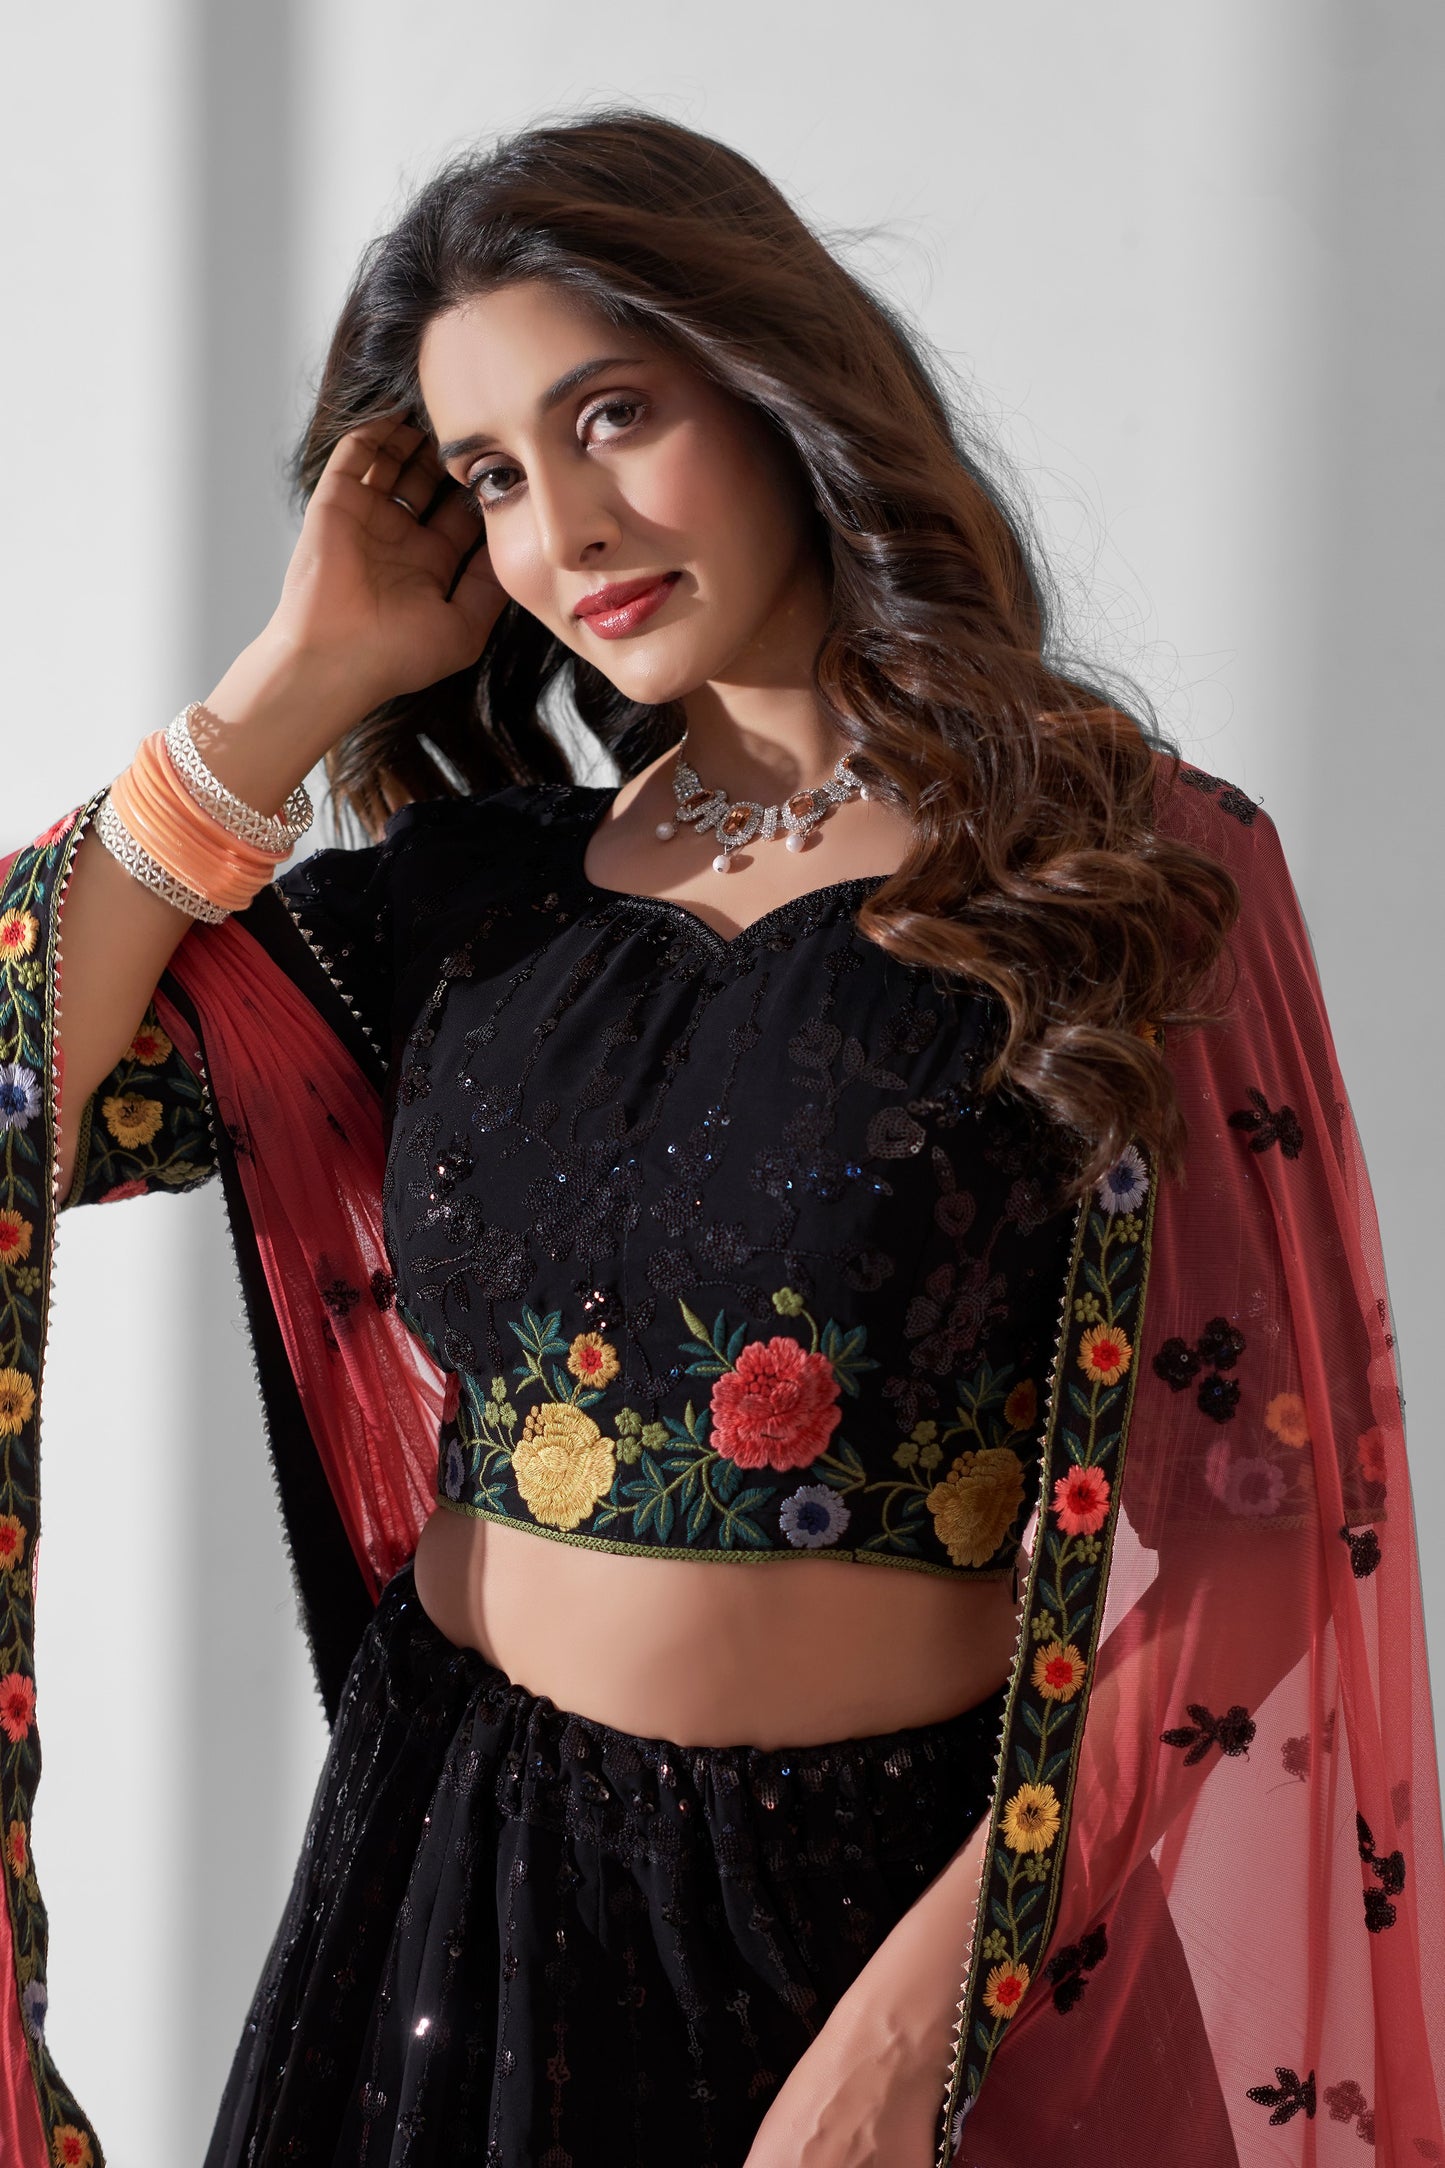 Black Georgette Flower Embroidered Lehenga Choli For Indian Festivals & Weddings - Sequence Embroidery Work, Thread Embroidery Work